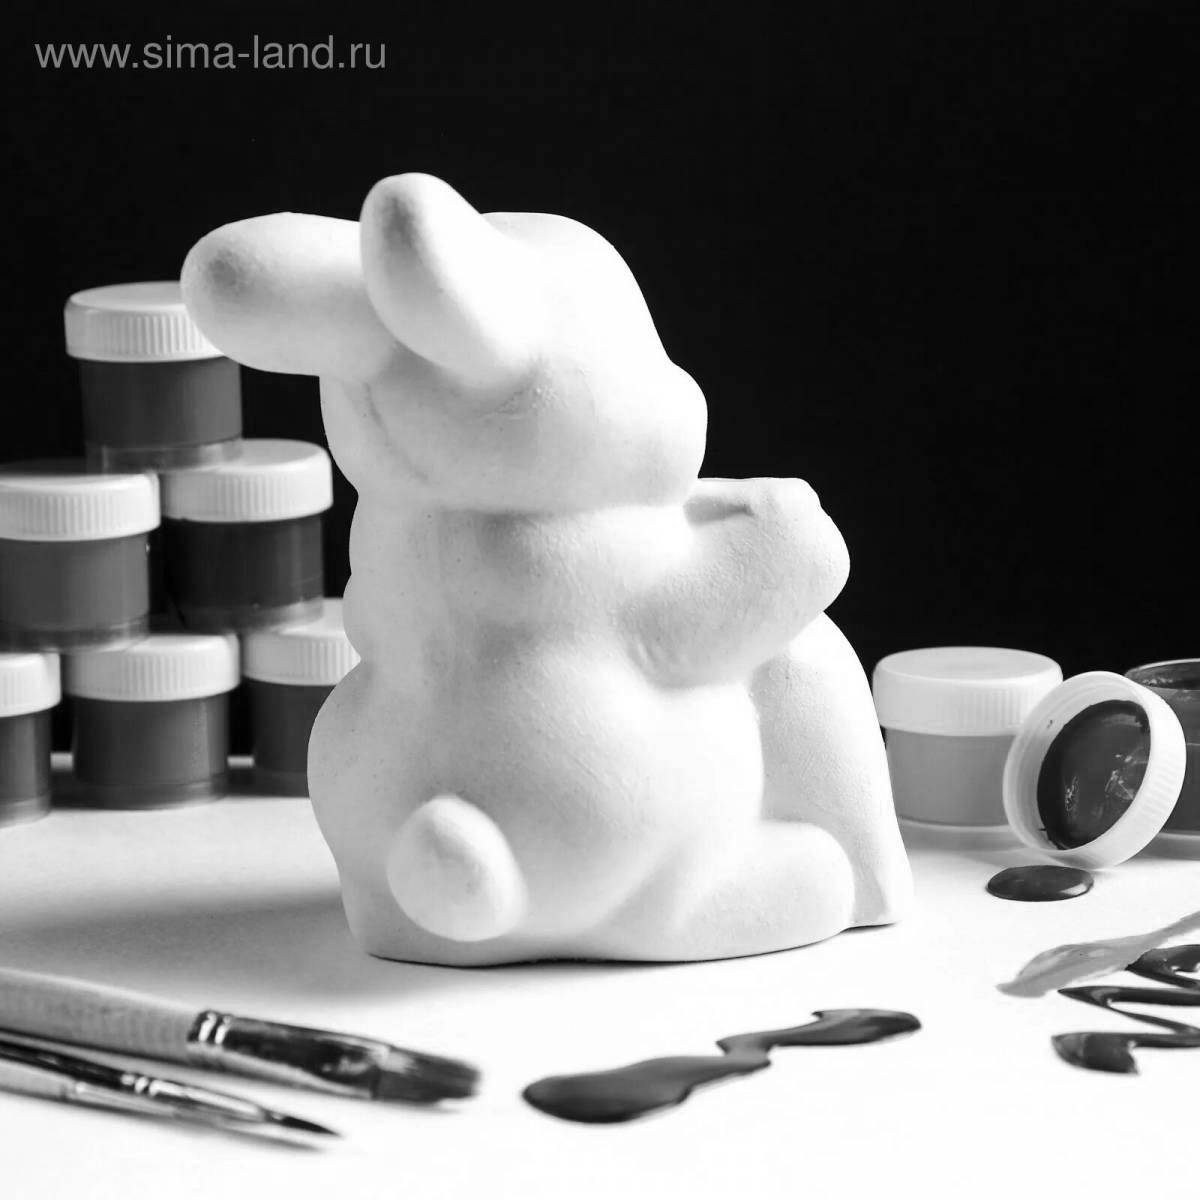 Colouring charming plaster figurines